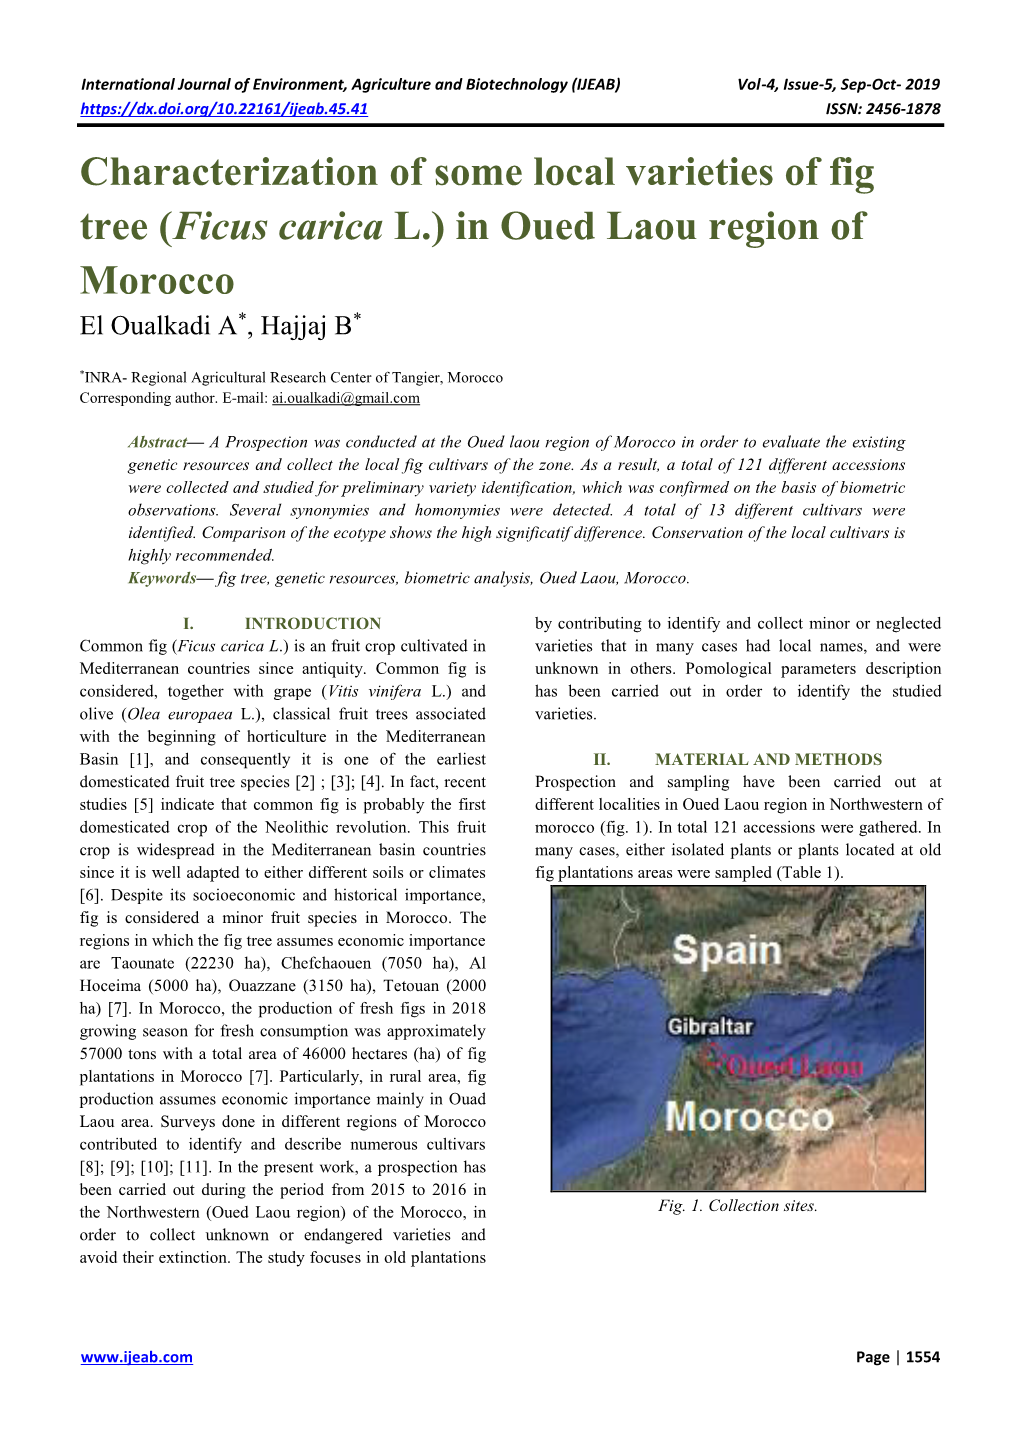 Characterization of Some Local Varieties of Fig Tree (Ficus Carica L.) in Oued Laou Region of Morocco El Oualkadi A*, Hajjaj B*